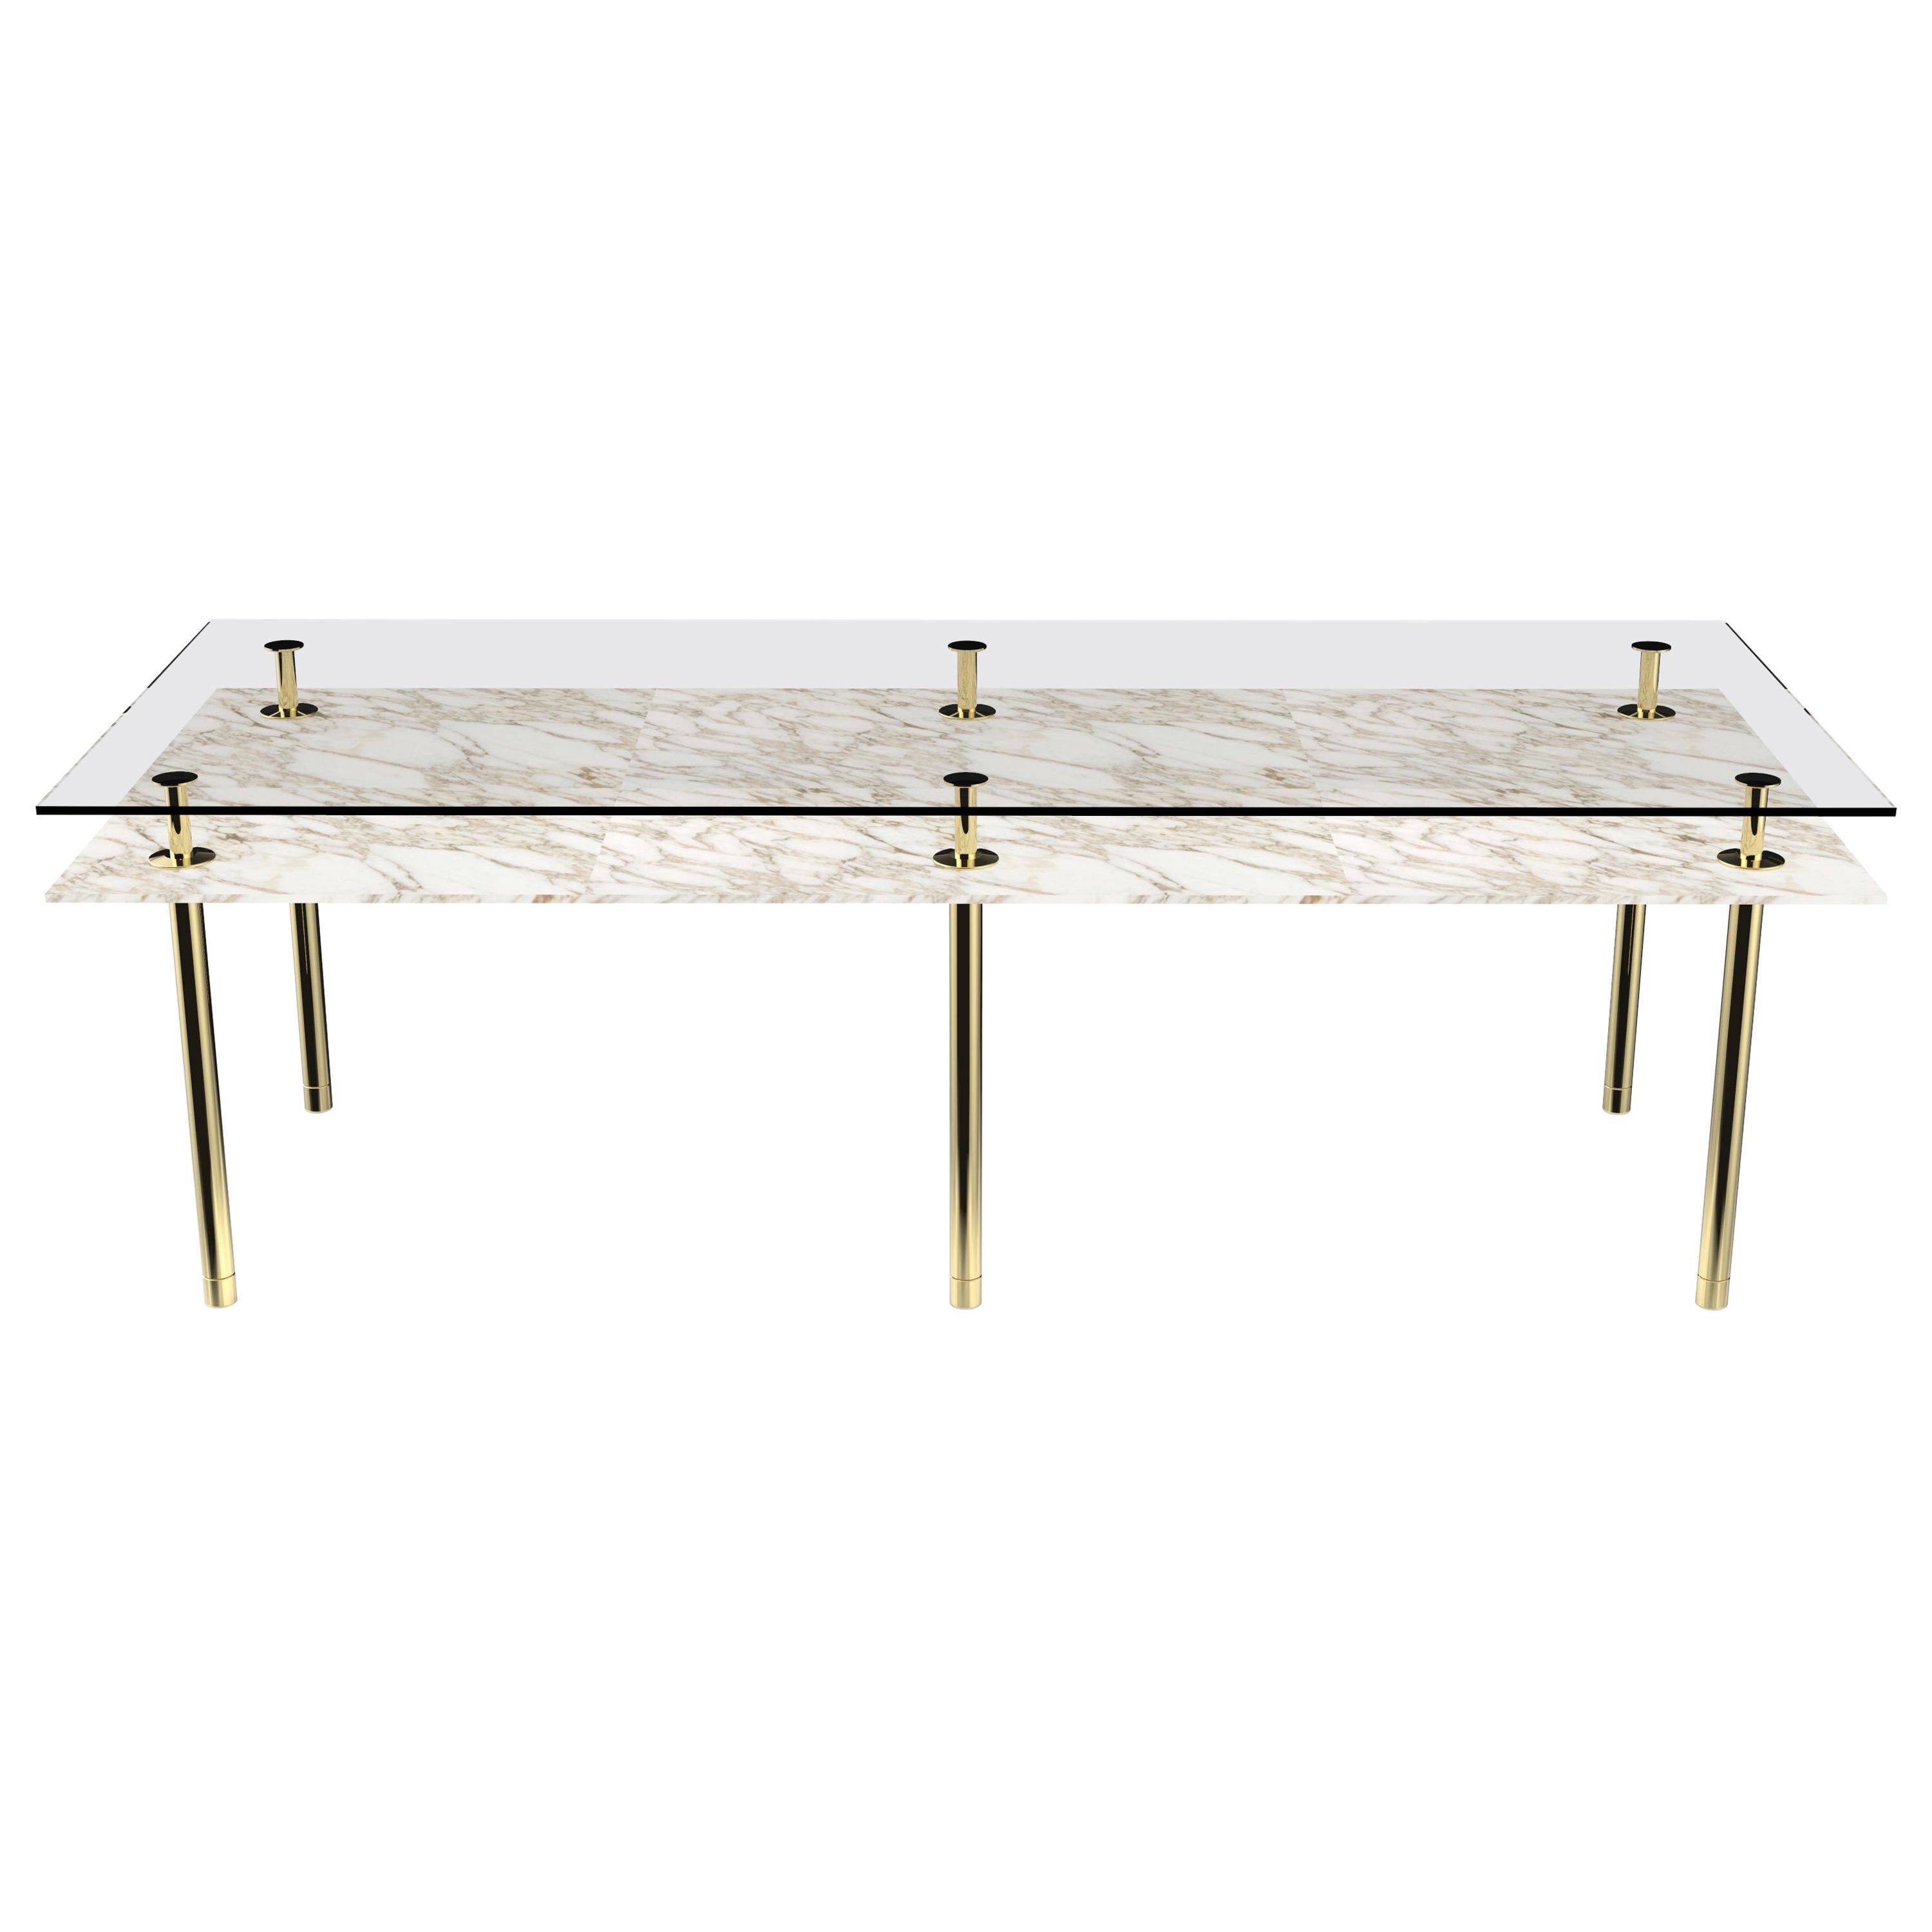 Legs Medium Dining Table with Calacatta Gold Marble Top and Polished Brass